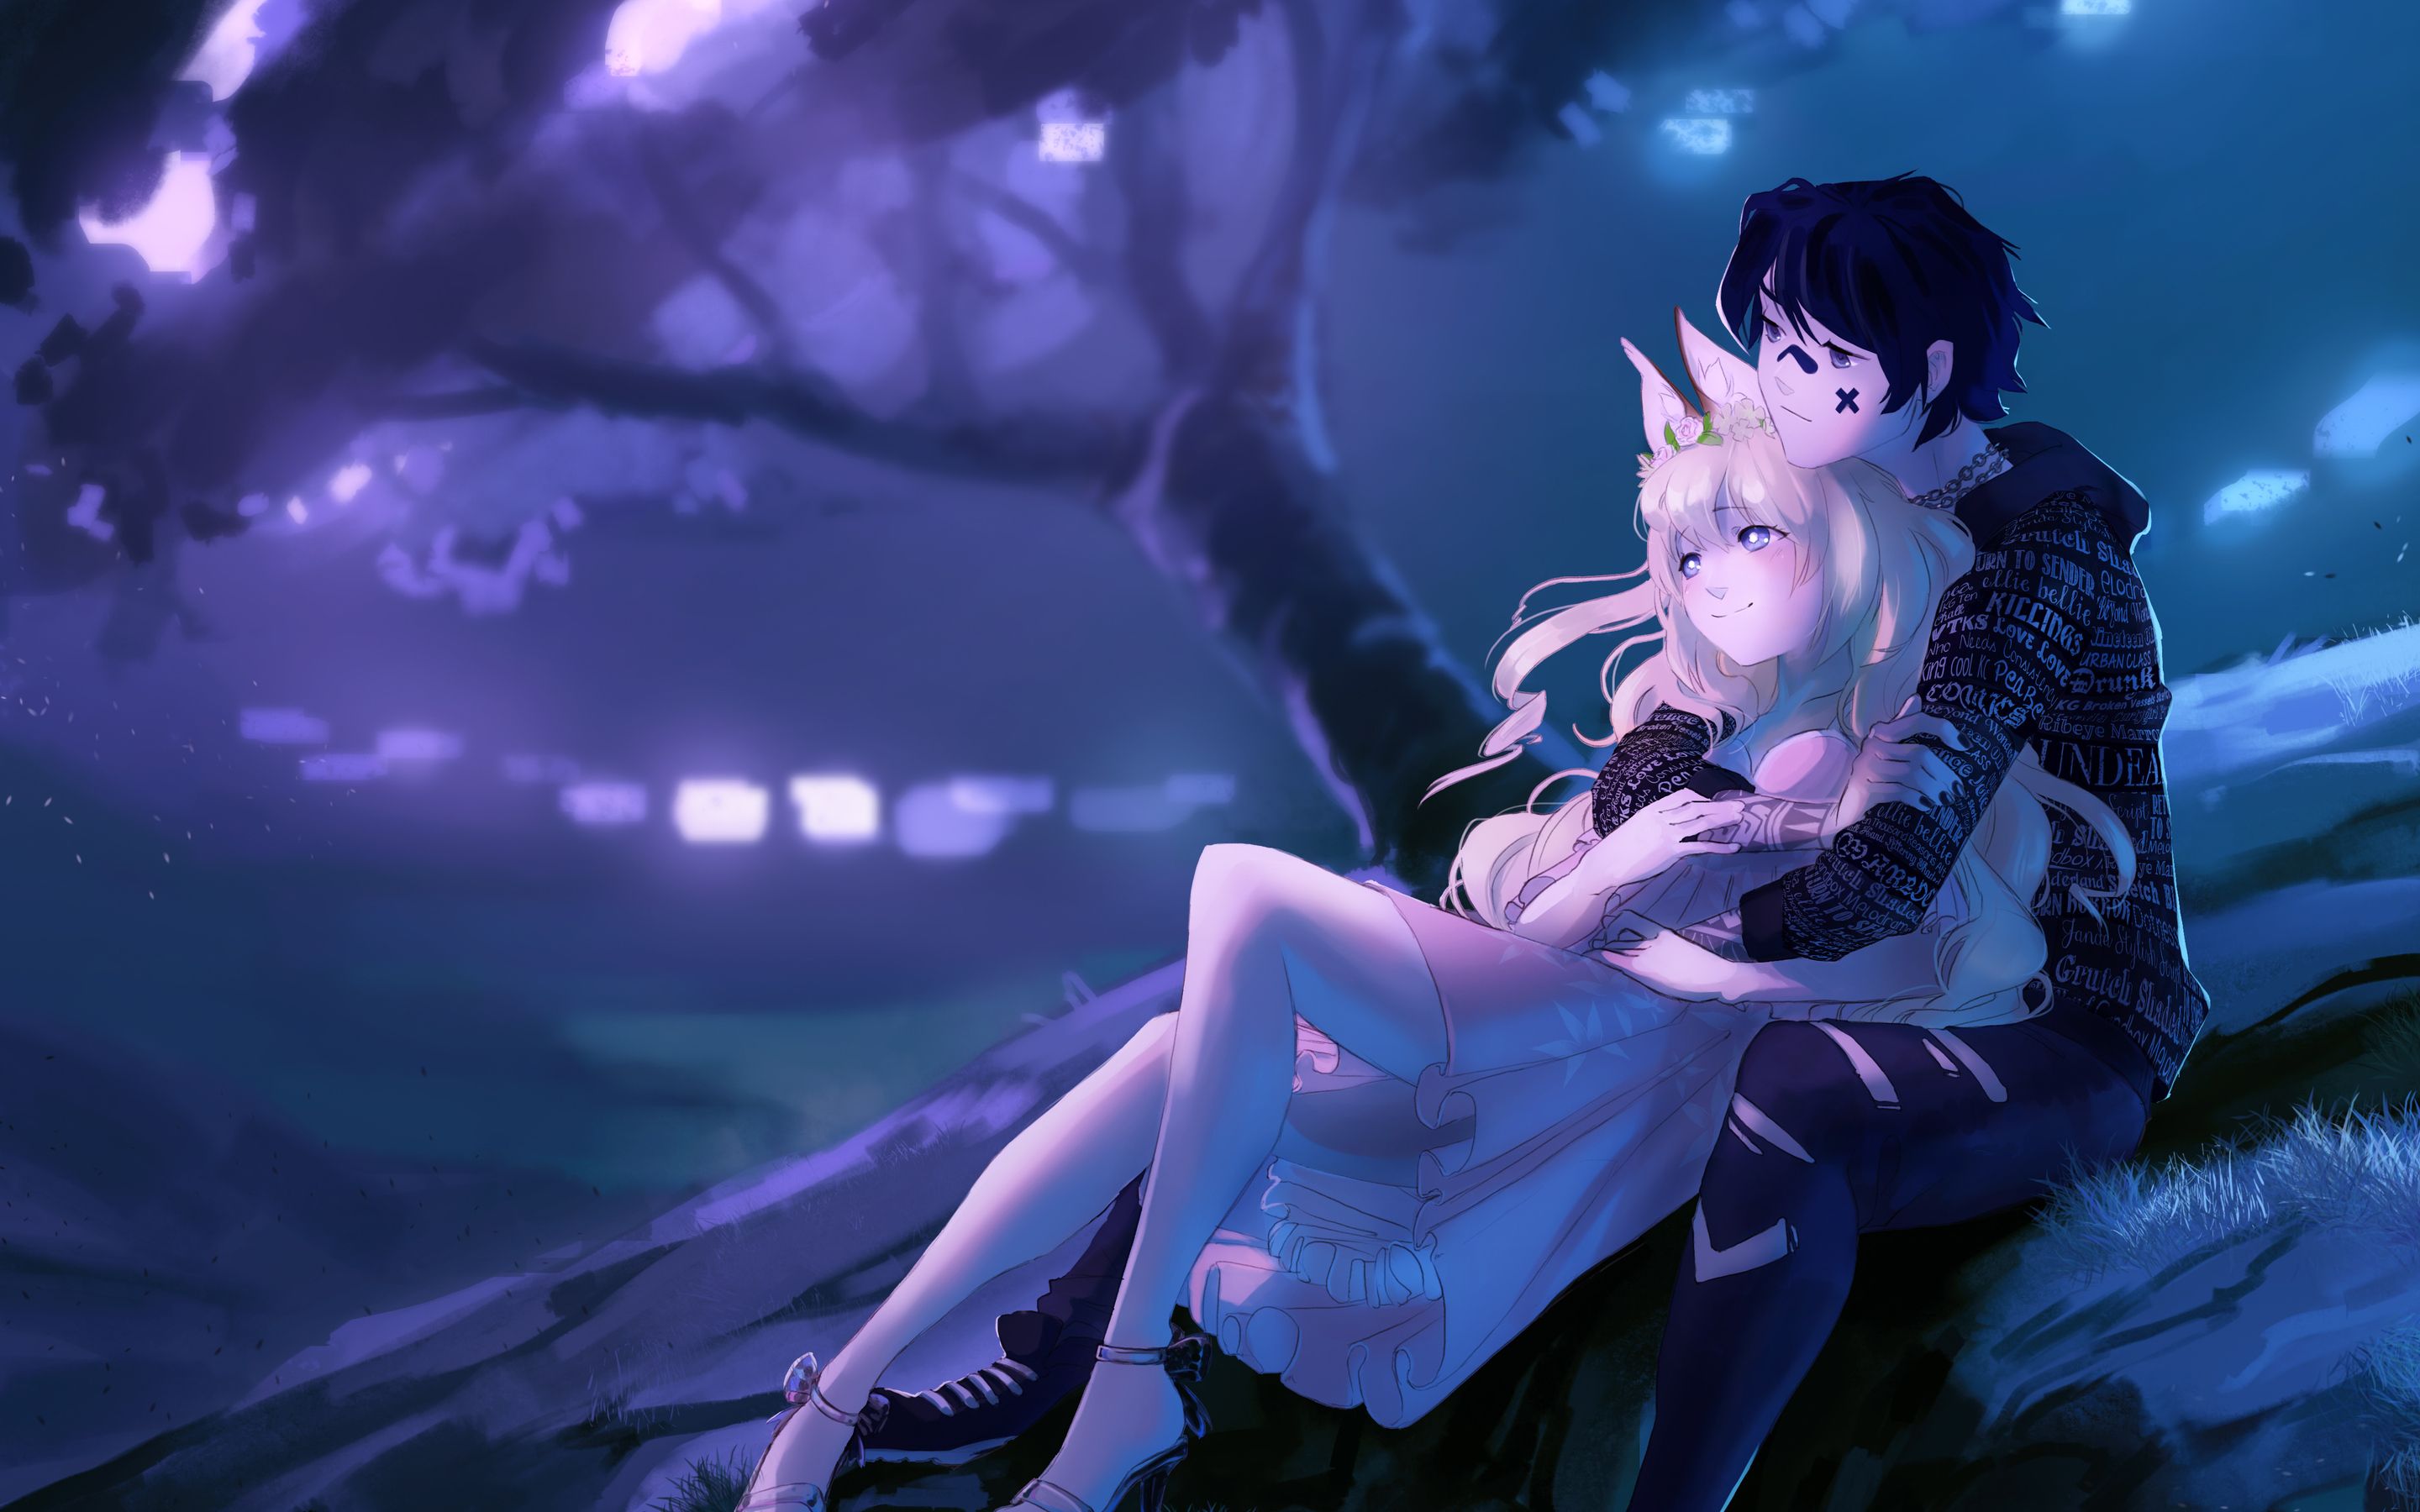 Wallpaper Anime Couple / Free Download Cute Anime Couple Wallpaper 70 Image 1920x1080 For Your Desktop Mobile Tablet Explore 30 Cute Anime Couples Wallpaper Cute Anime Couples Wallpaper Anime Couples Wallpaper Couples